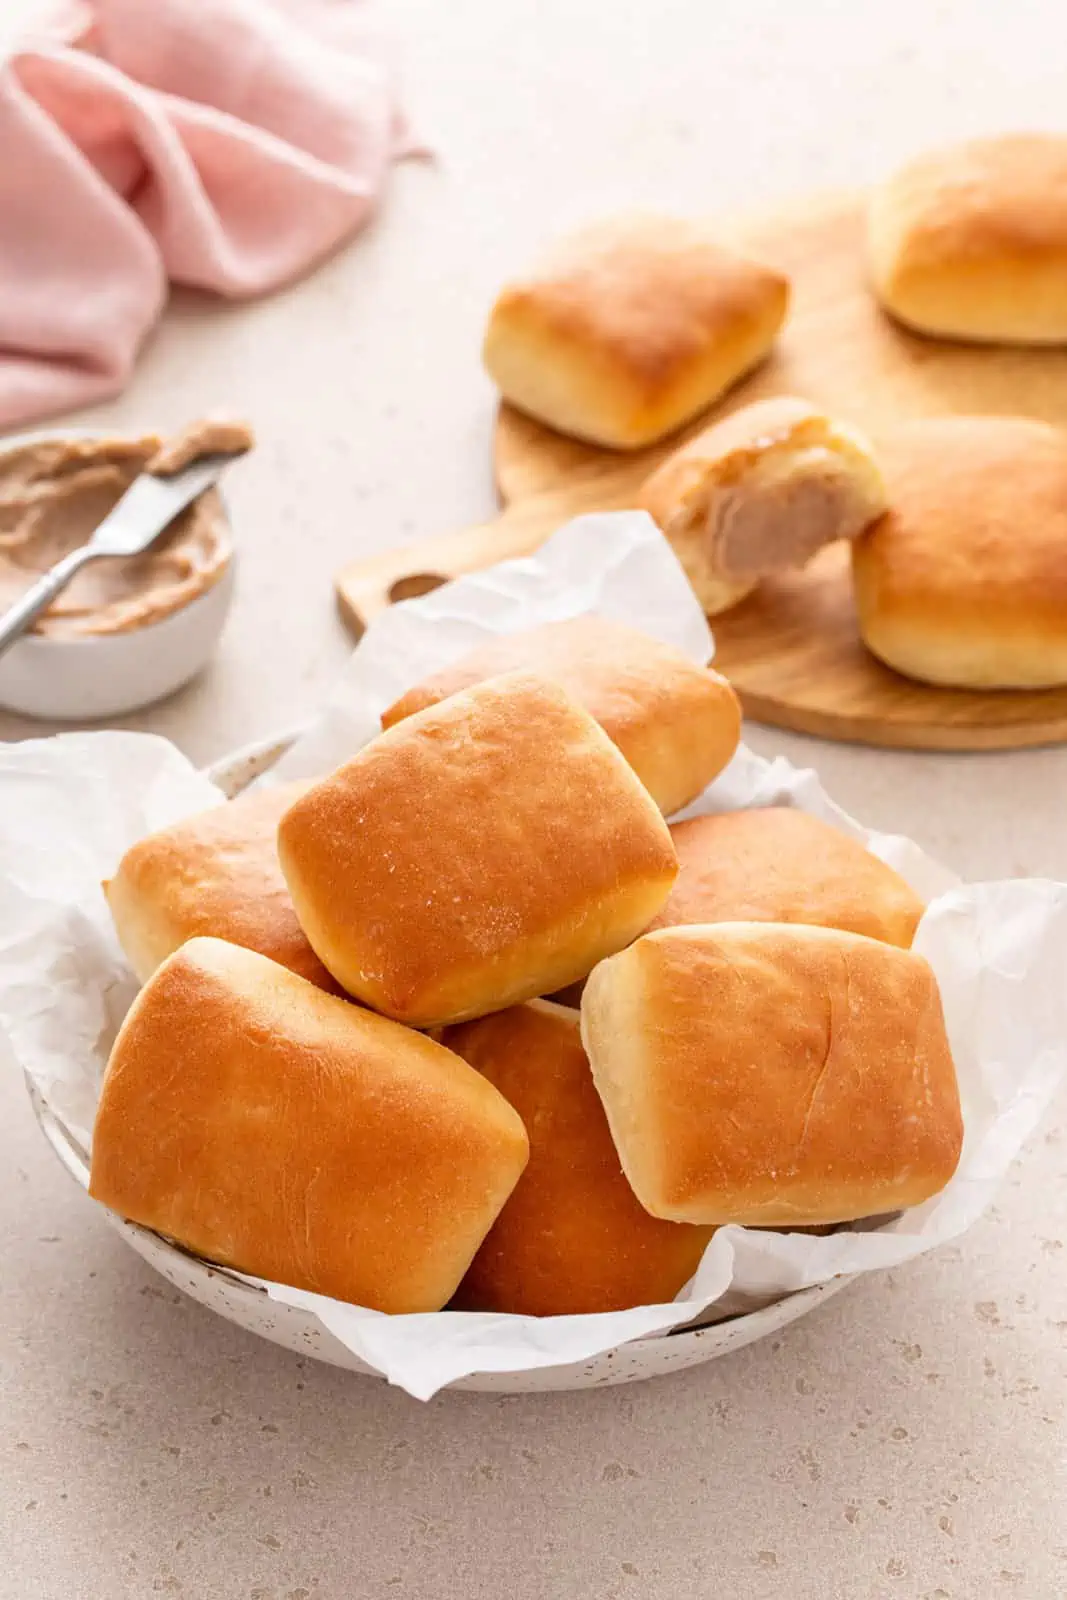 Texas Roadhouse rolls in a parchment-lined bowl with a board of more rolls visible in the background.